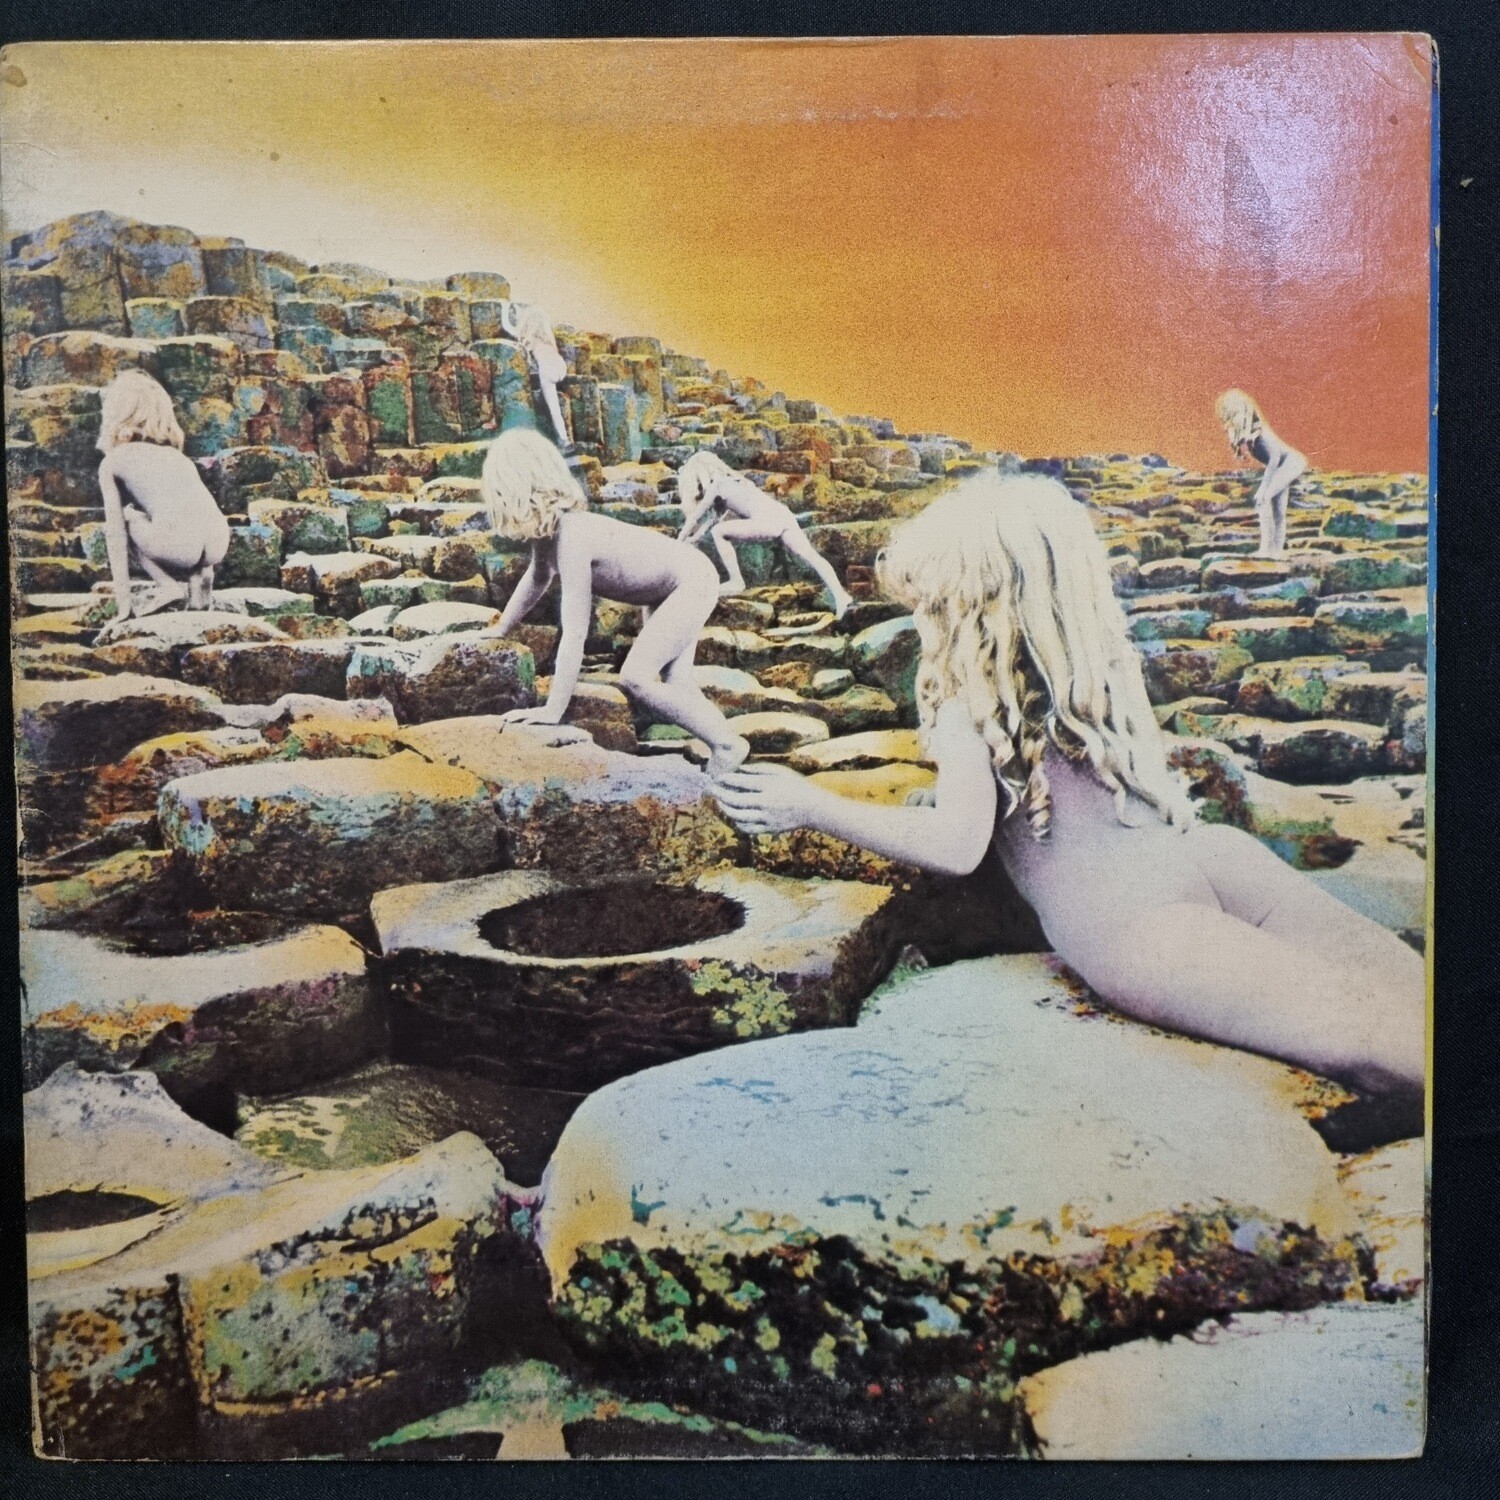 Led Zeppelin- Houses of the Holy